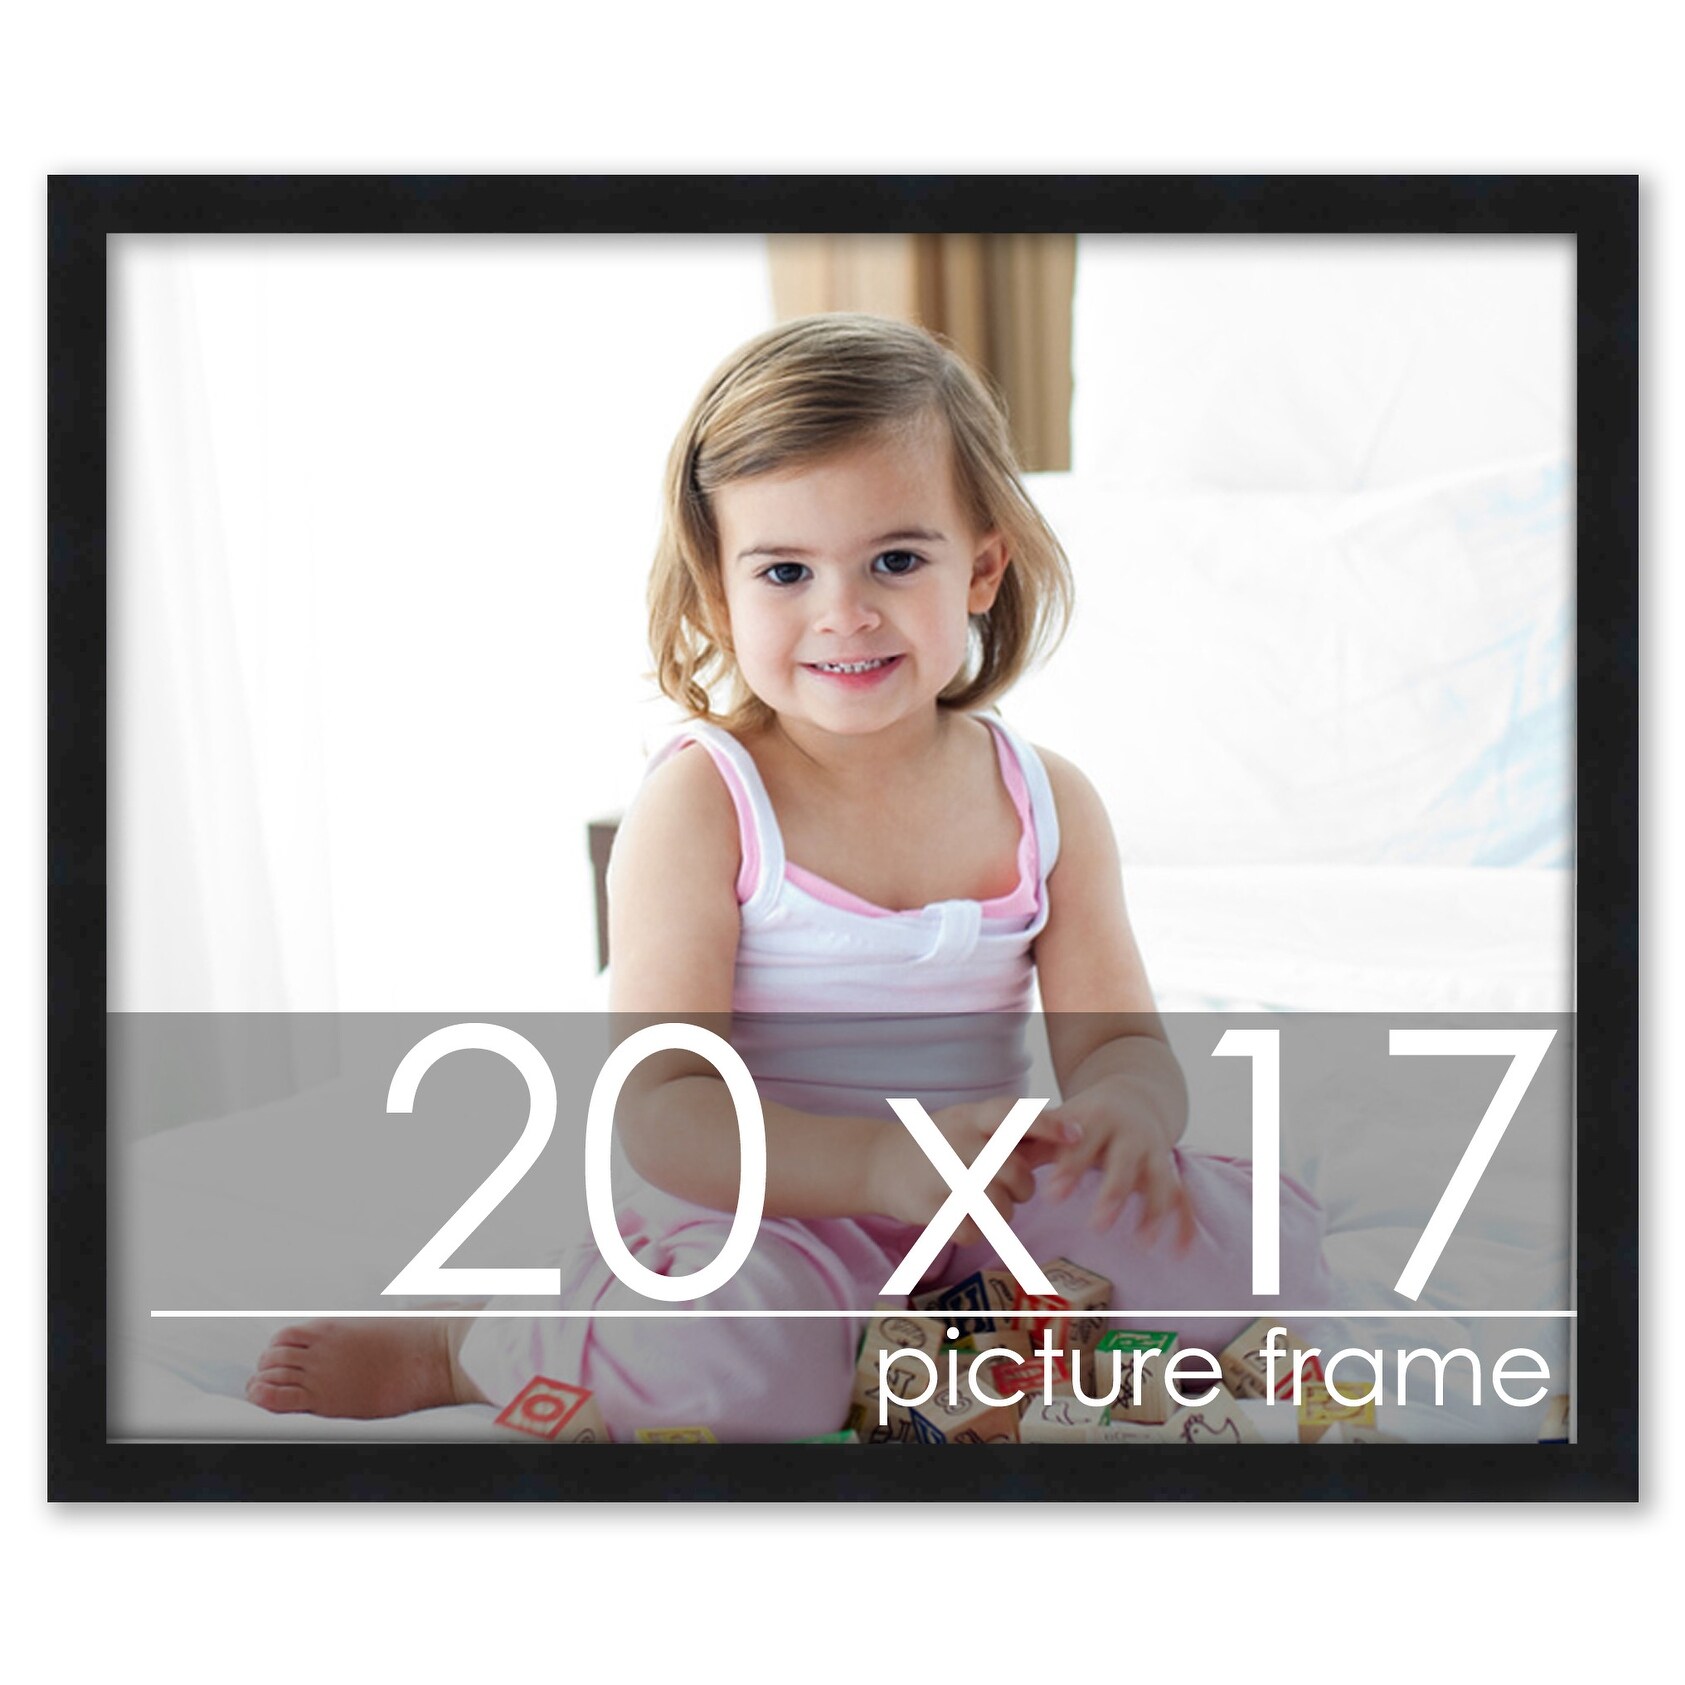 20x17 Ornate Silver Complete Wood Picture Frame with UV Acrylic, Foam Board Backing, & Hardware